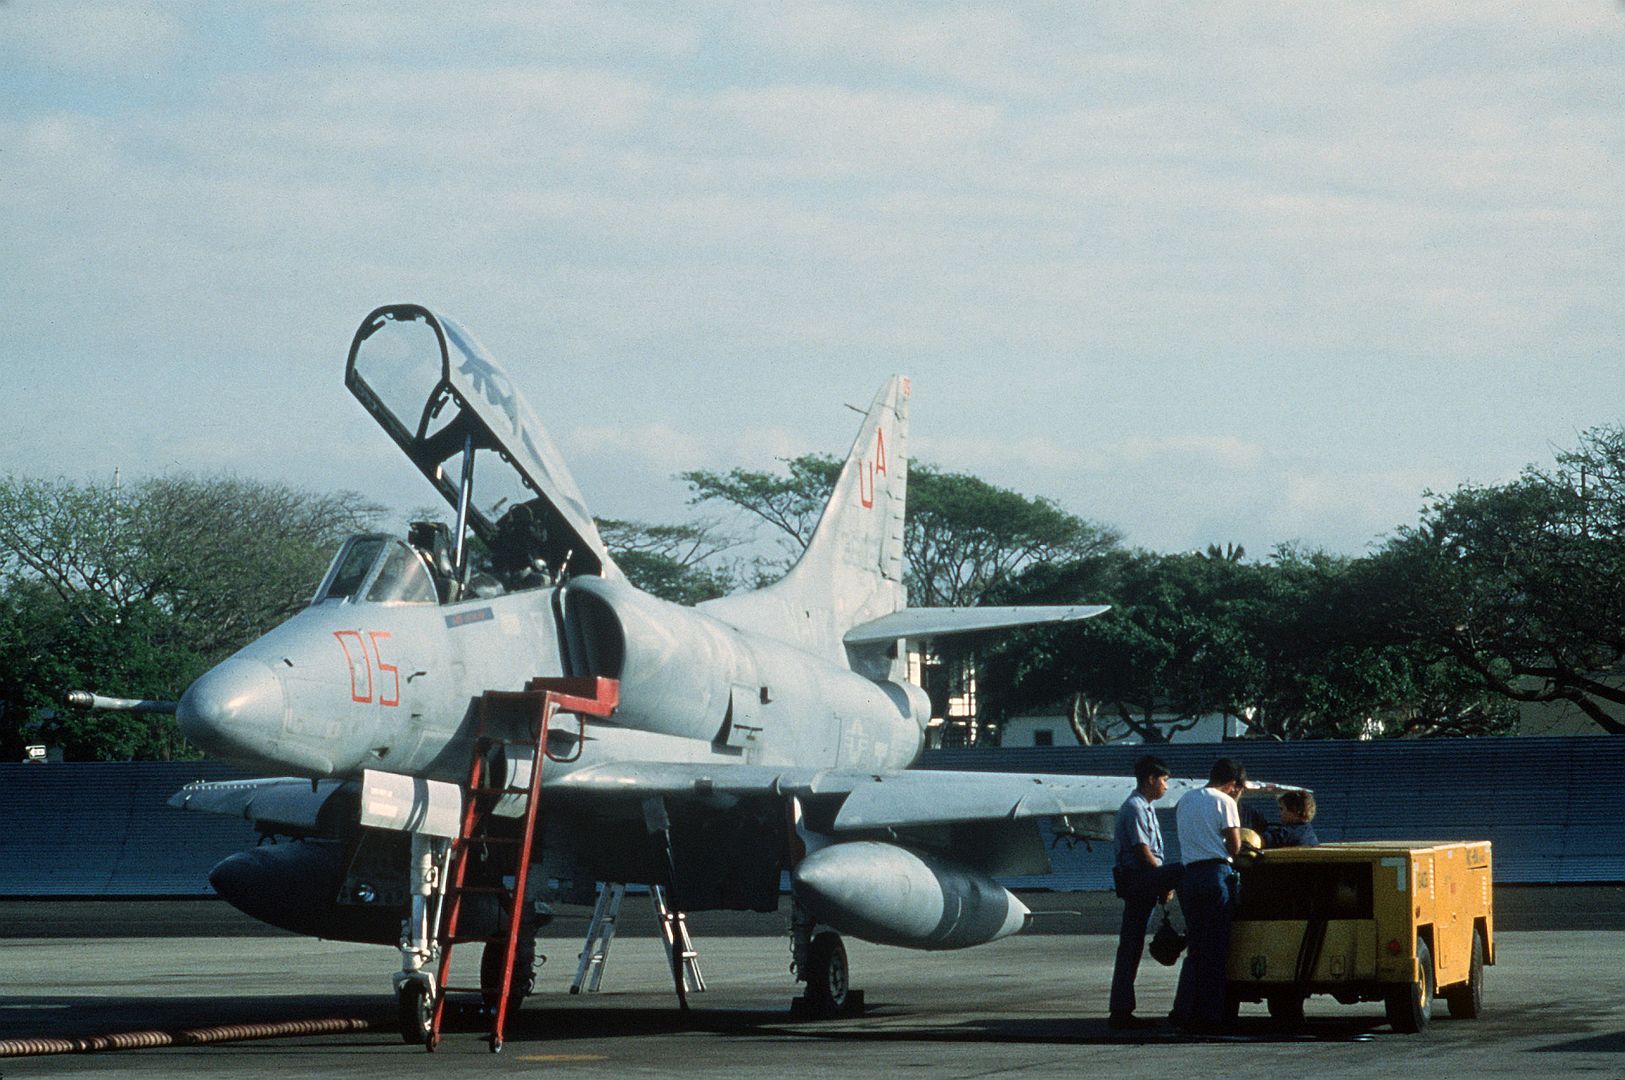 4 Skyhawk Aircraft Is Prepared For Flight Operations By Maintenance Personnel During Exercise COPE CANINE 85